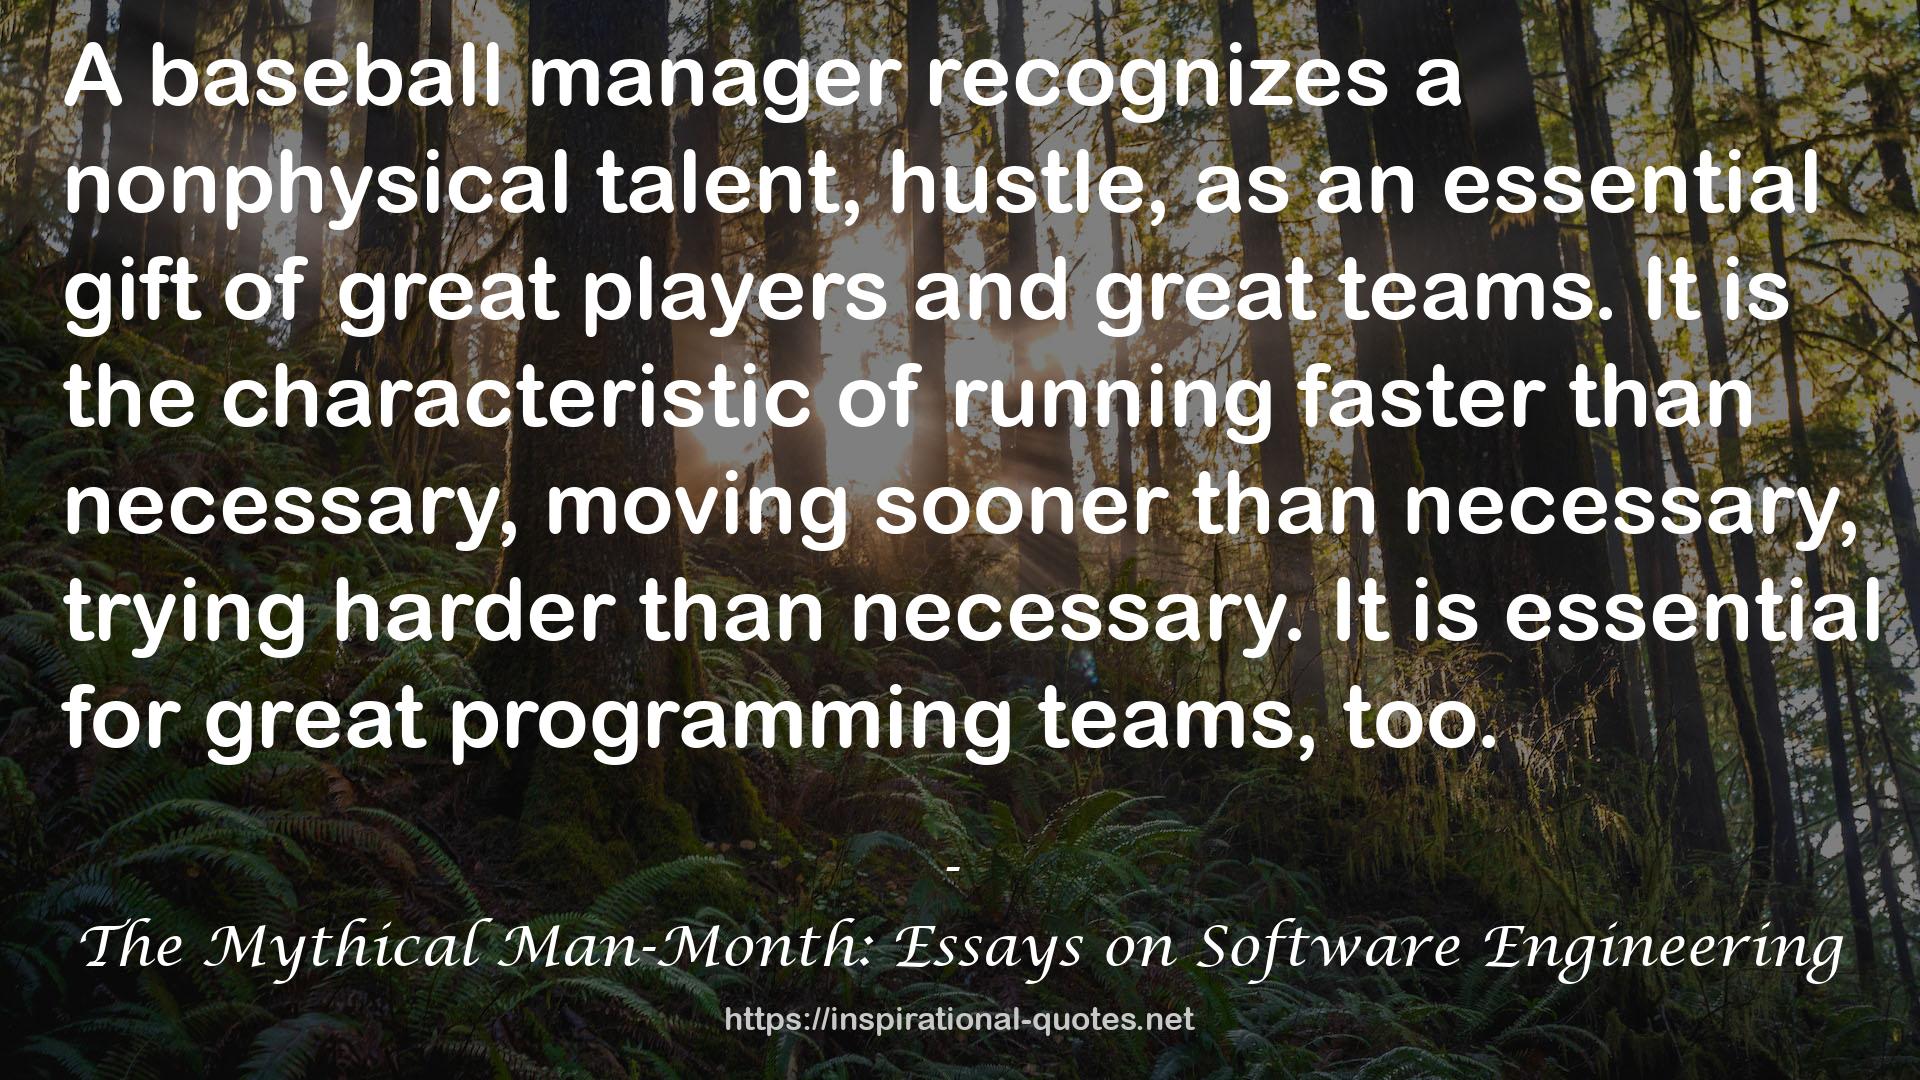 The Mythical Man-Month: Essays on Software Engineering QUOTES